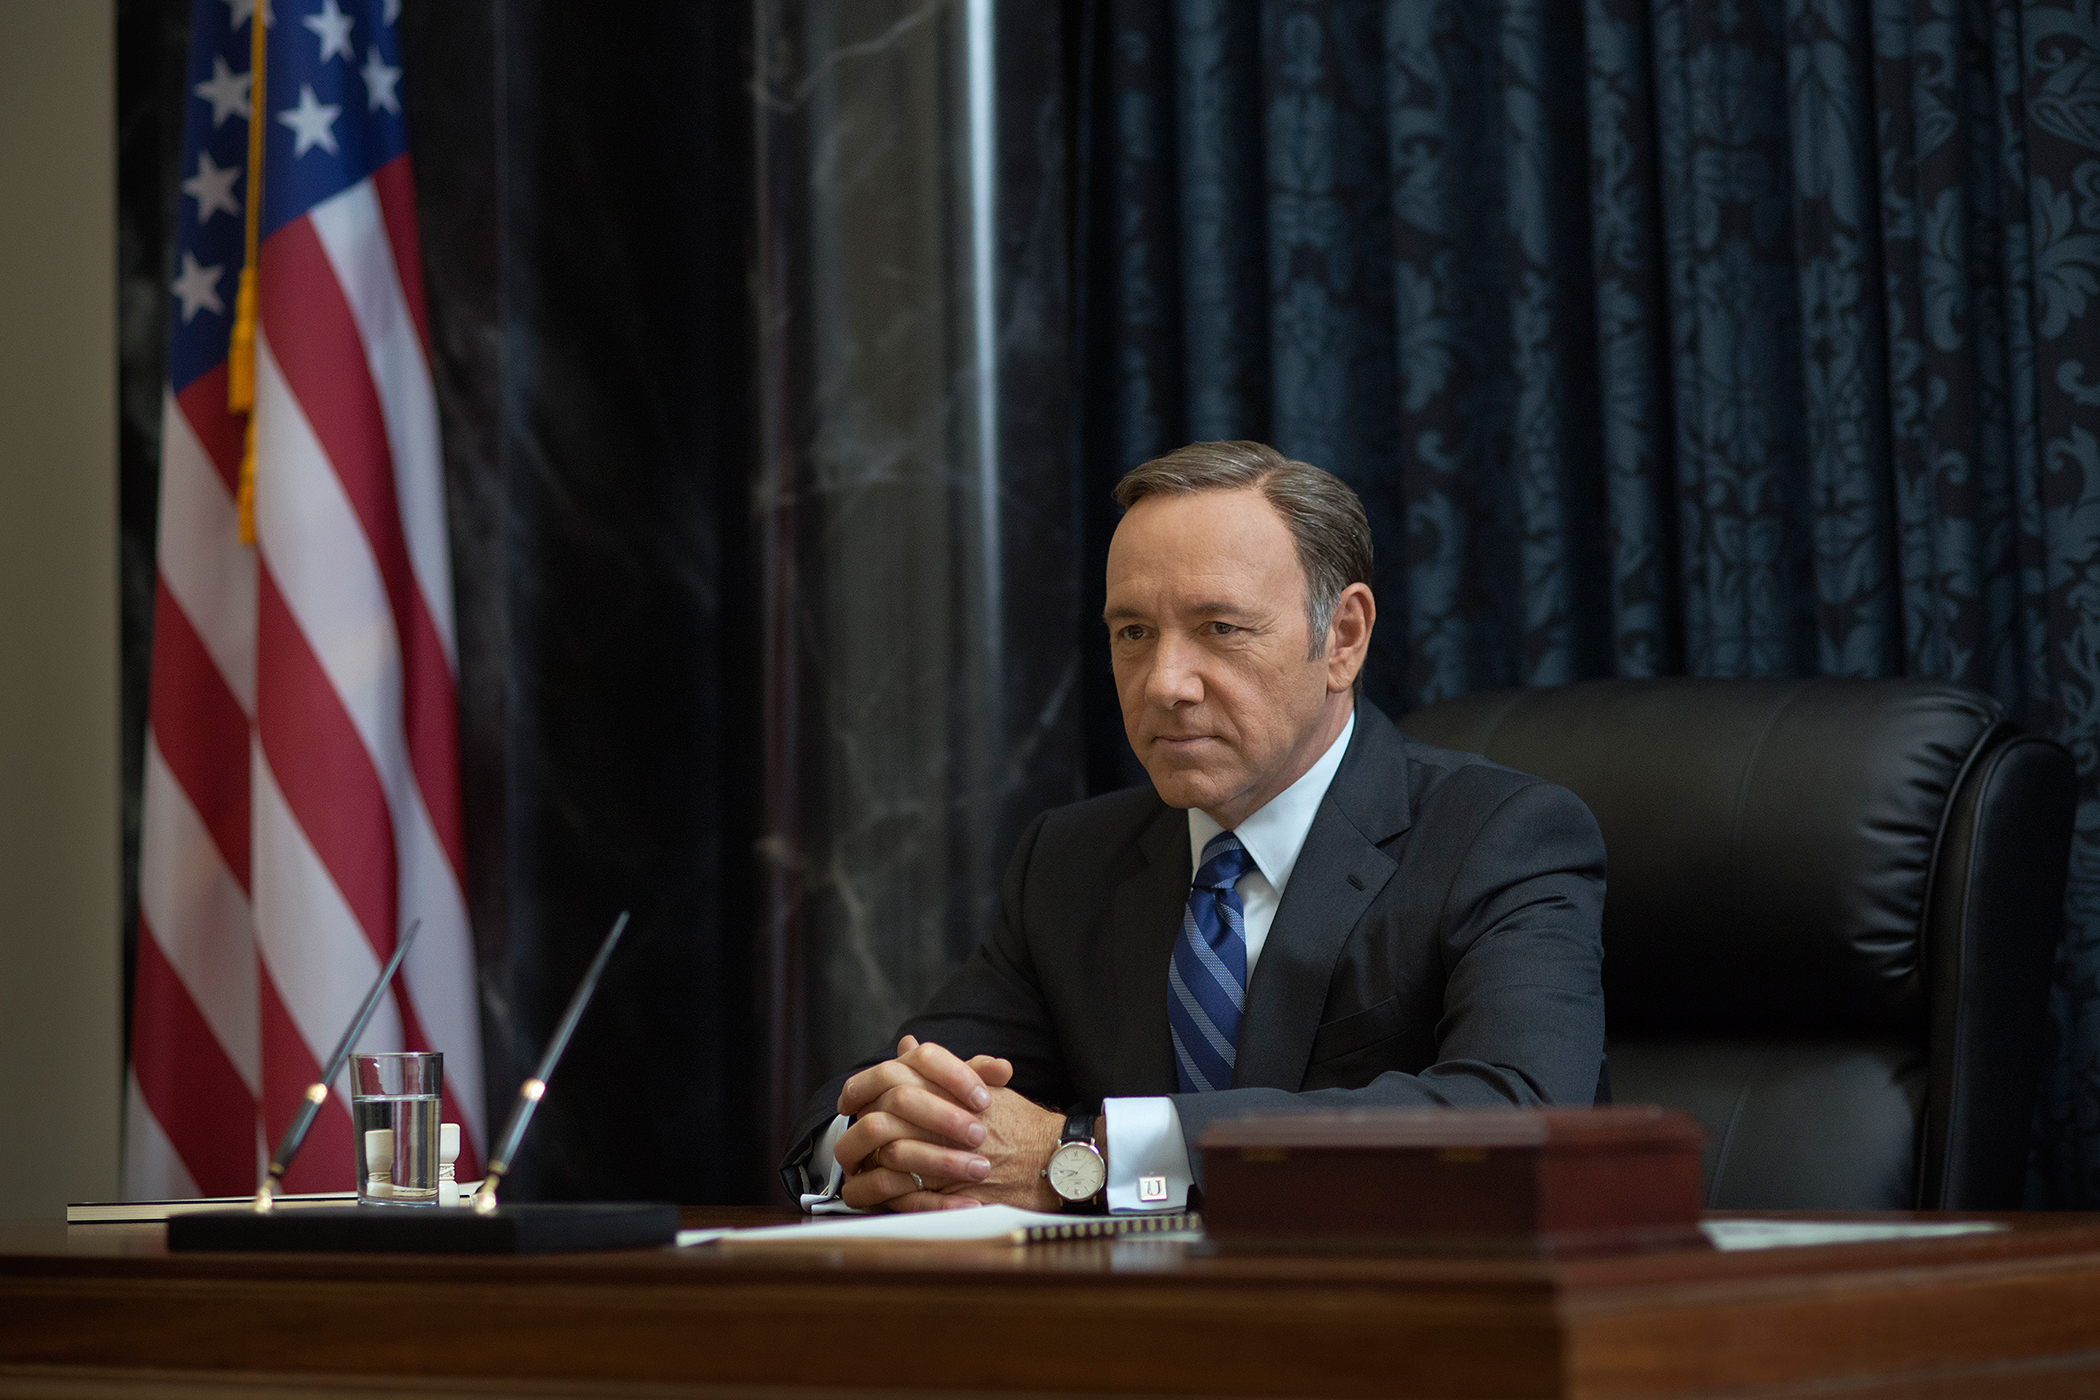 Kevin Spacey as Frank Underwood in "House of Cards” on Netflix